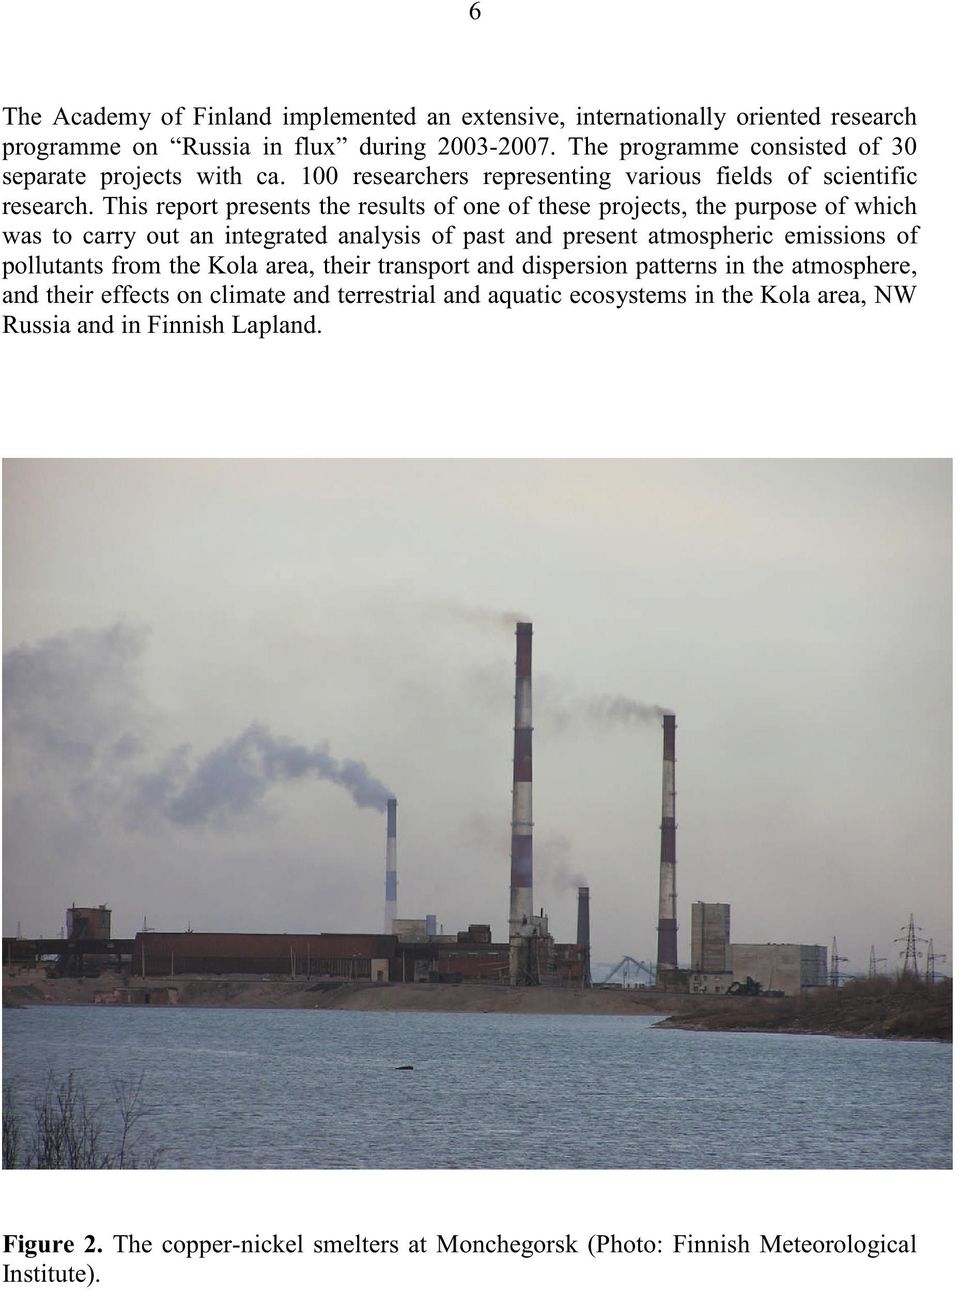 This report presents the results of one of these projects, the purpose of which was to carry out an integrated analysis of past and present atmospheric emissions of pollutants from